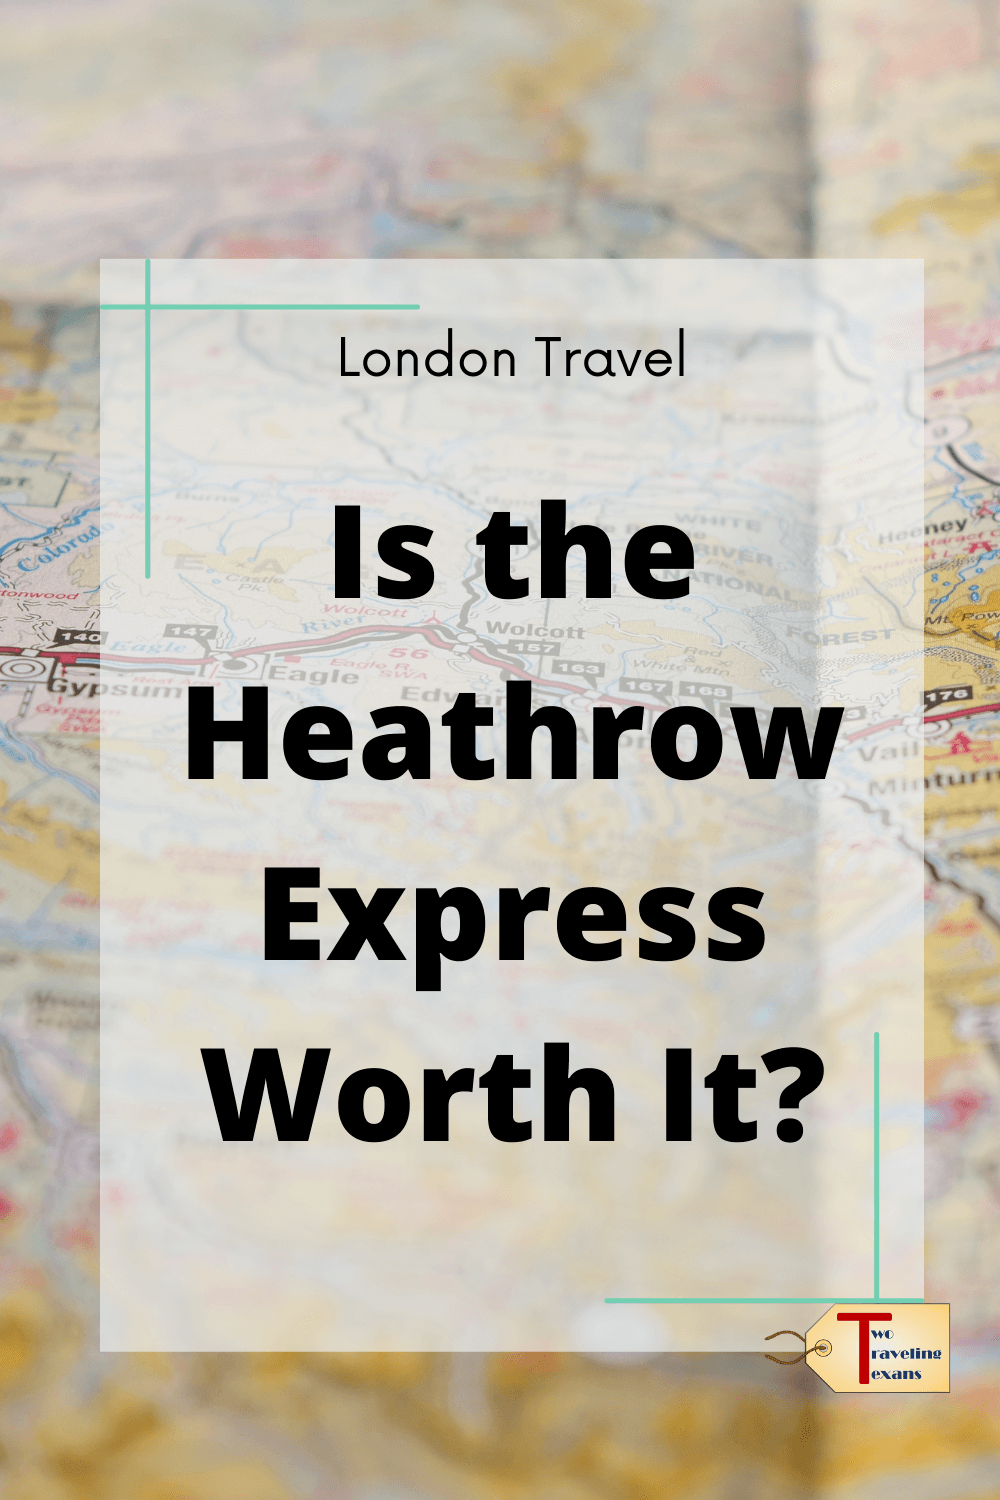 blurred map with text overlay "London Travel: Is the Heathrow Express Worth it?